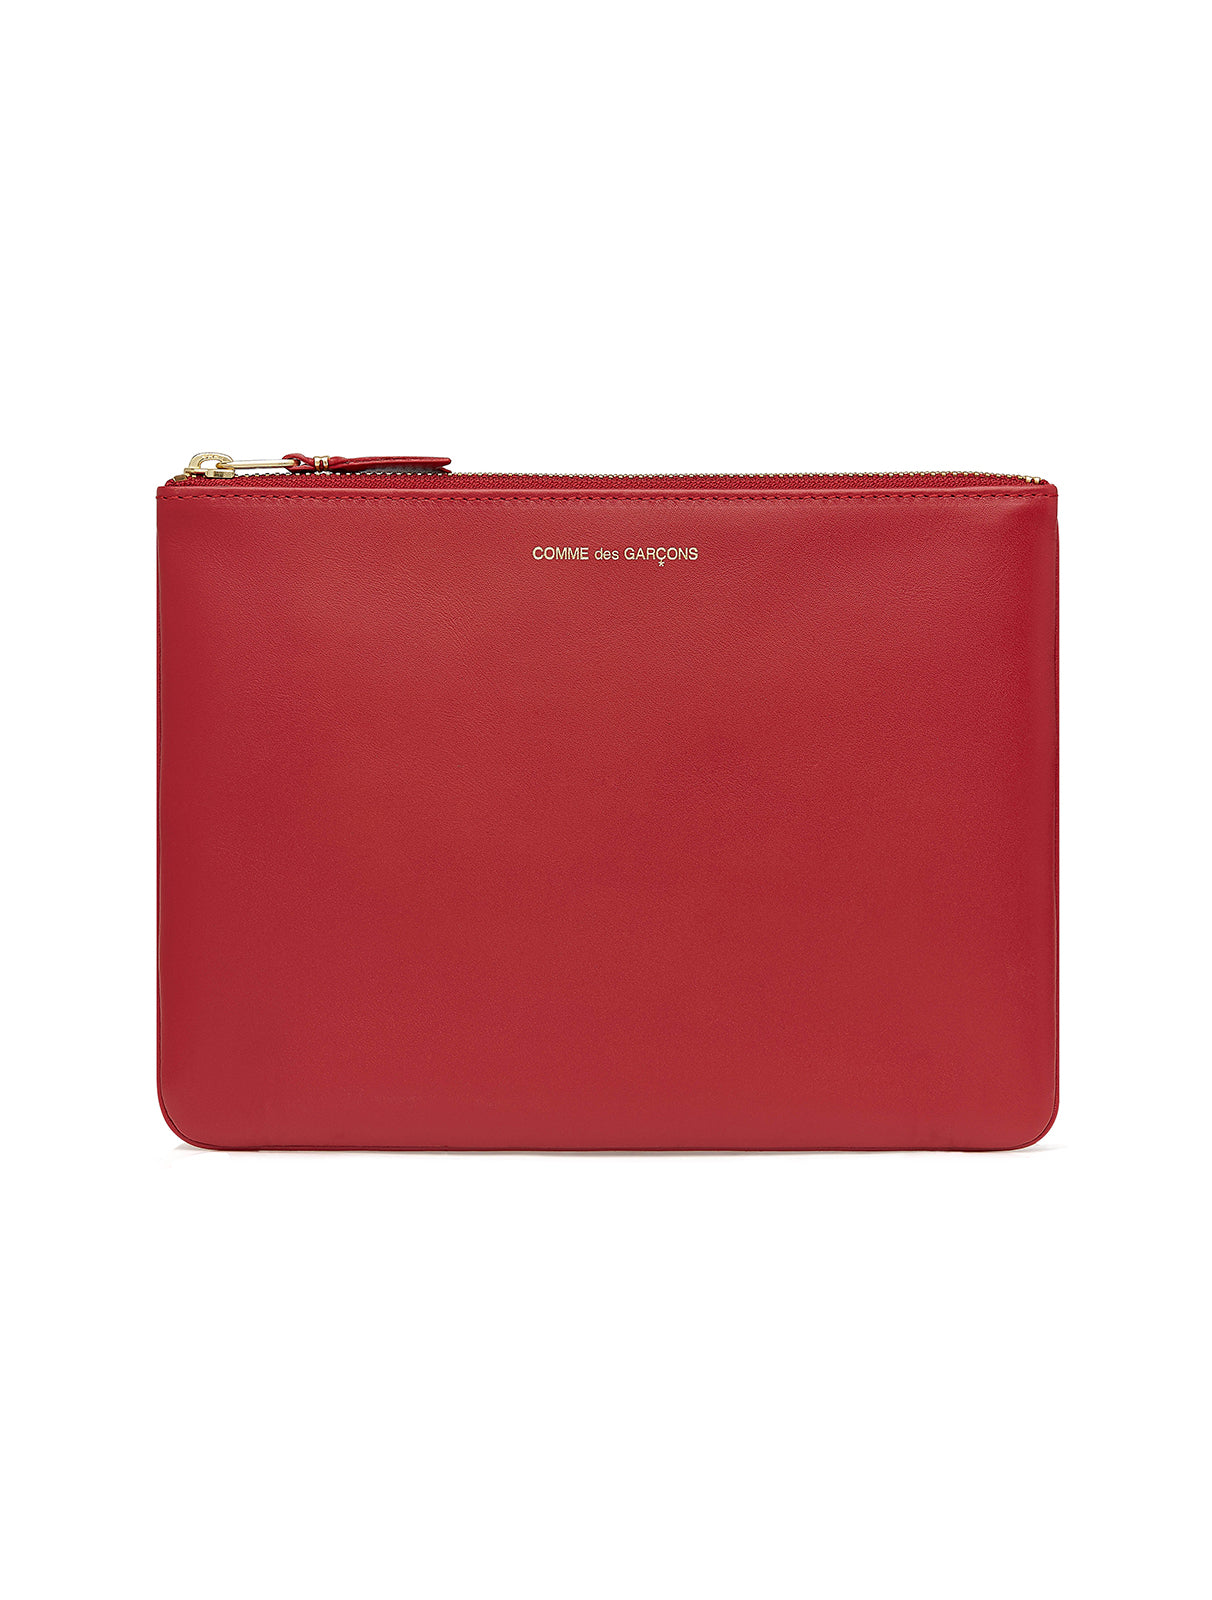 Classic Red Large Zip Pouch